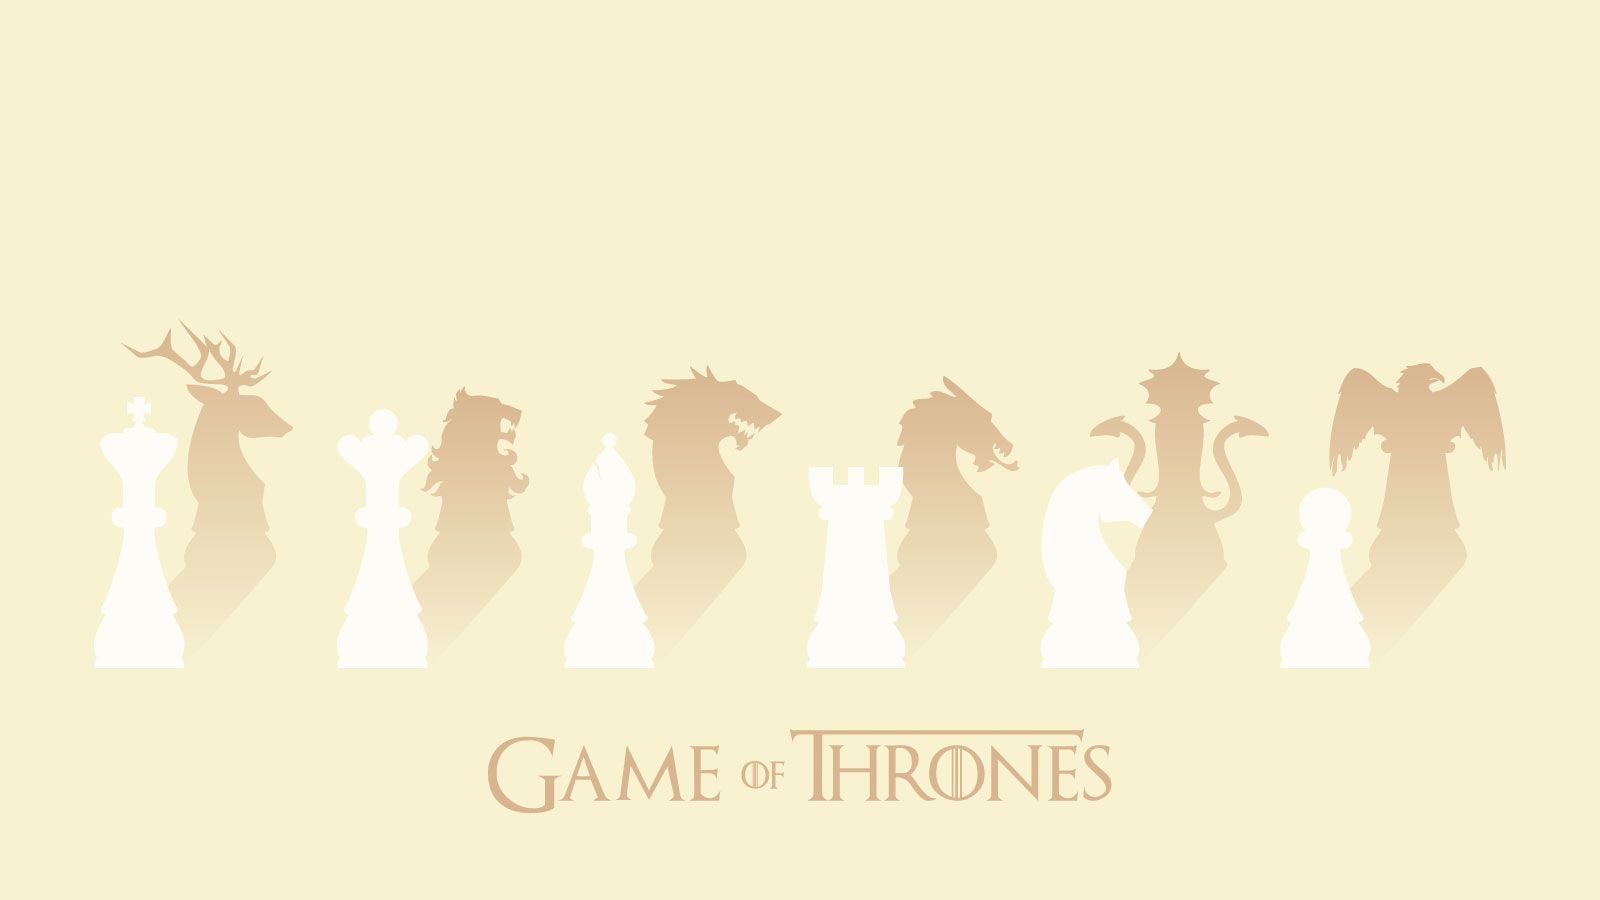 A Game of Thrones Wallpaper I made[1600x900]